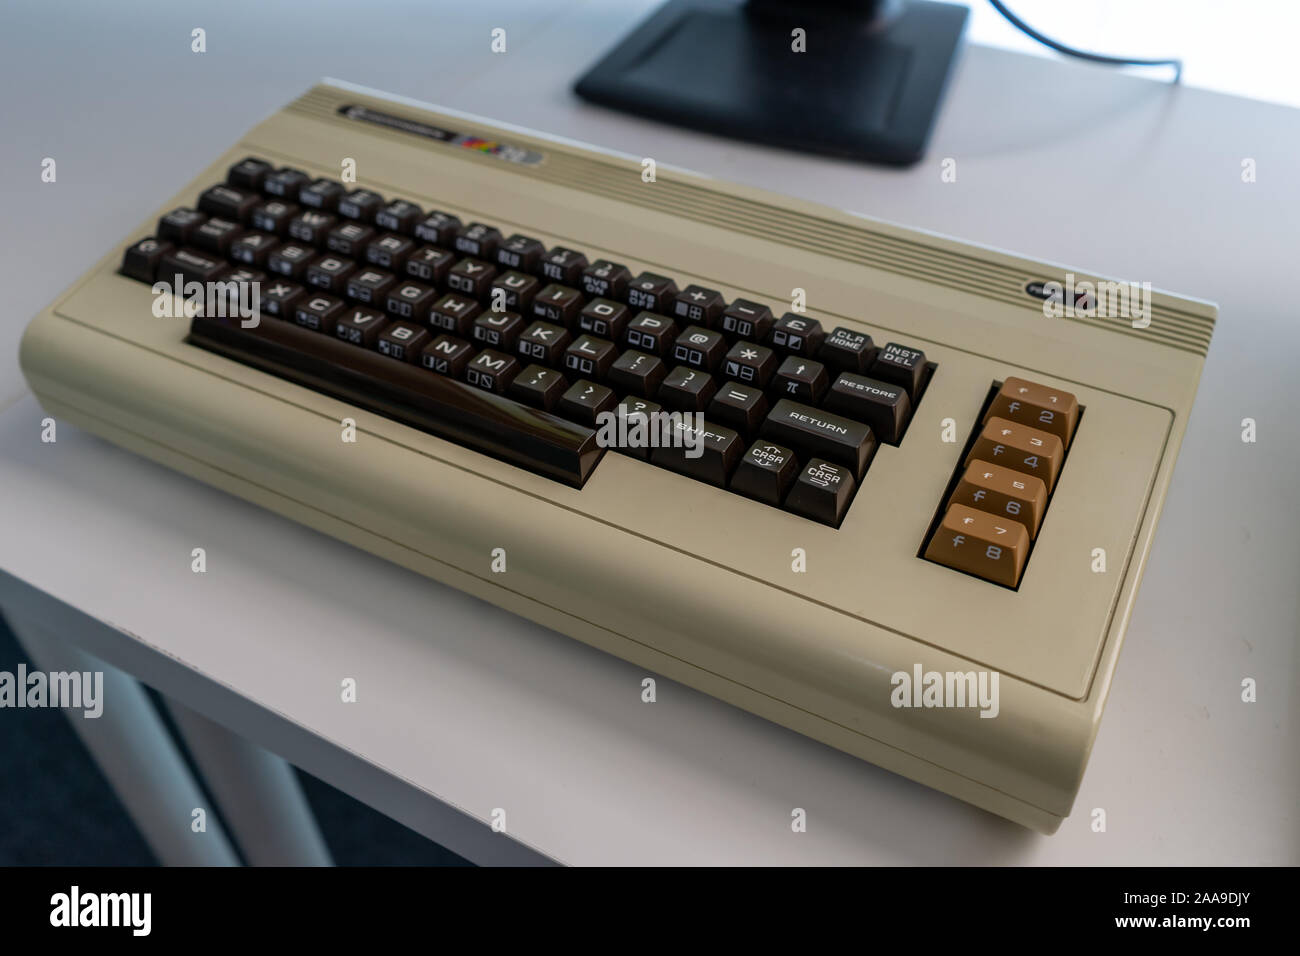 A commodore 64 vintage computer produced in the 1980's a very popular retro home computer or PC Stock Photo